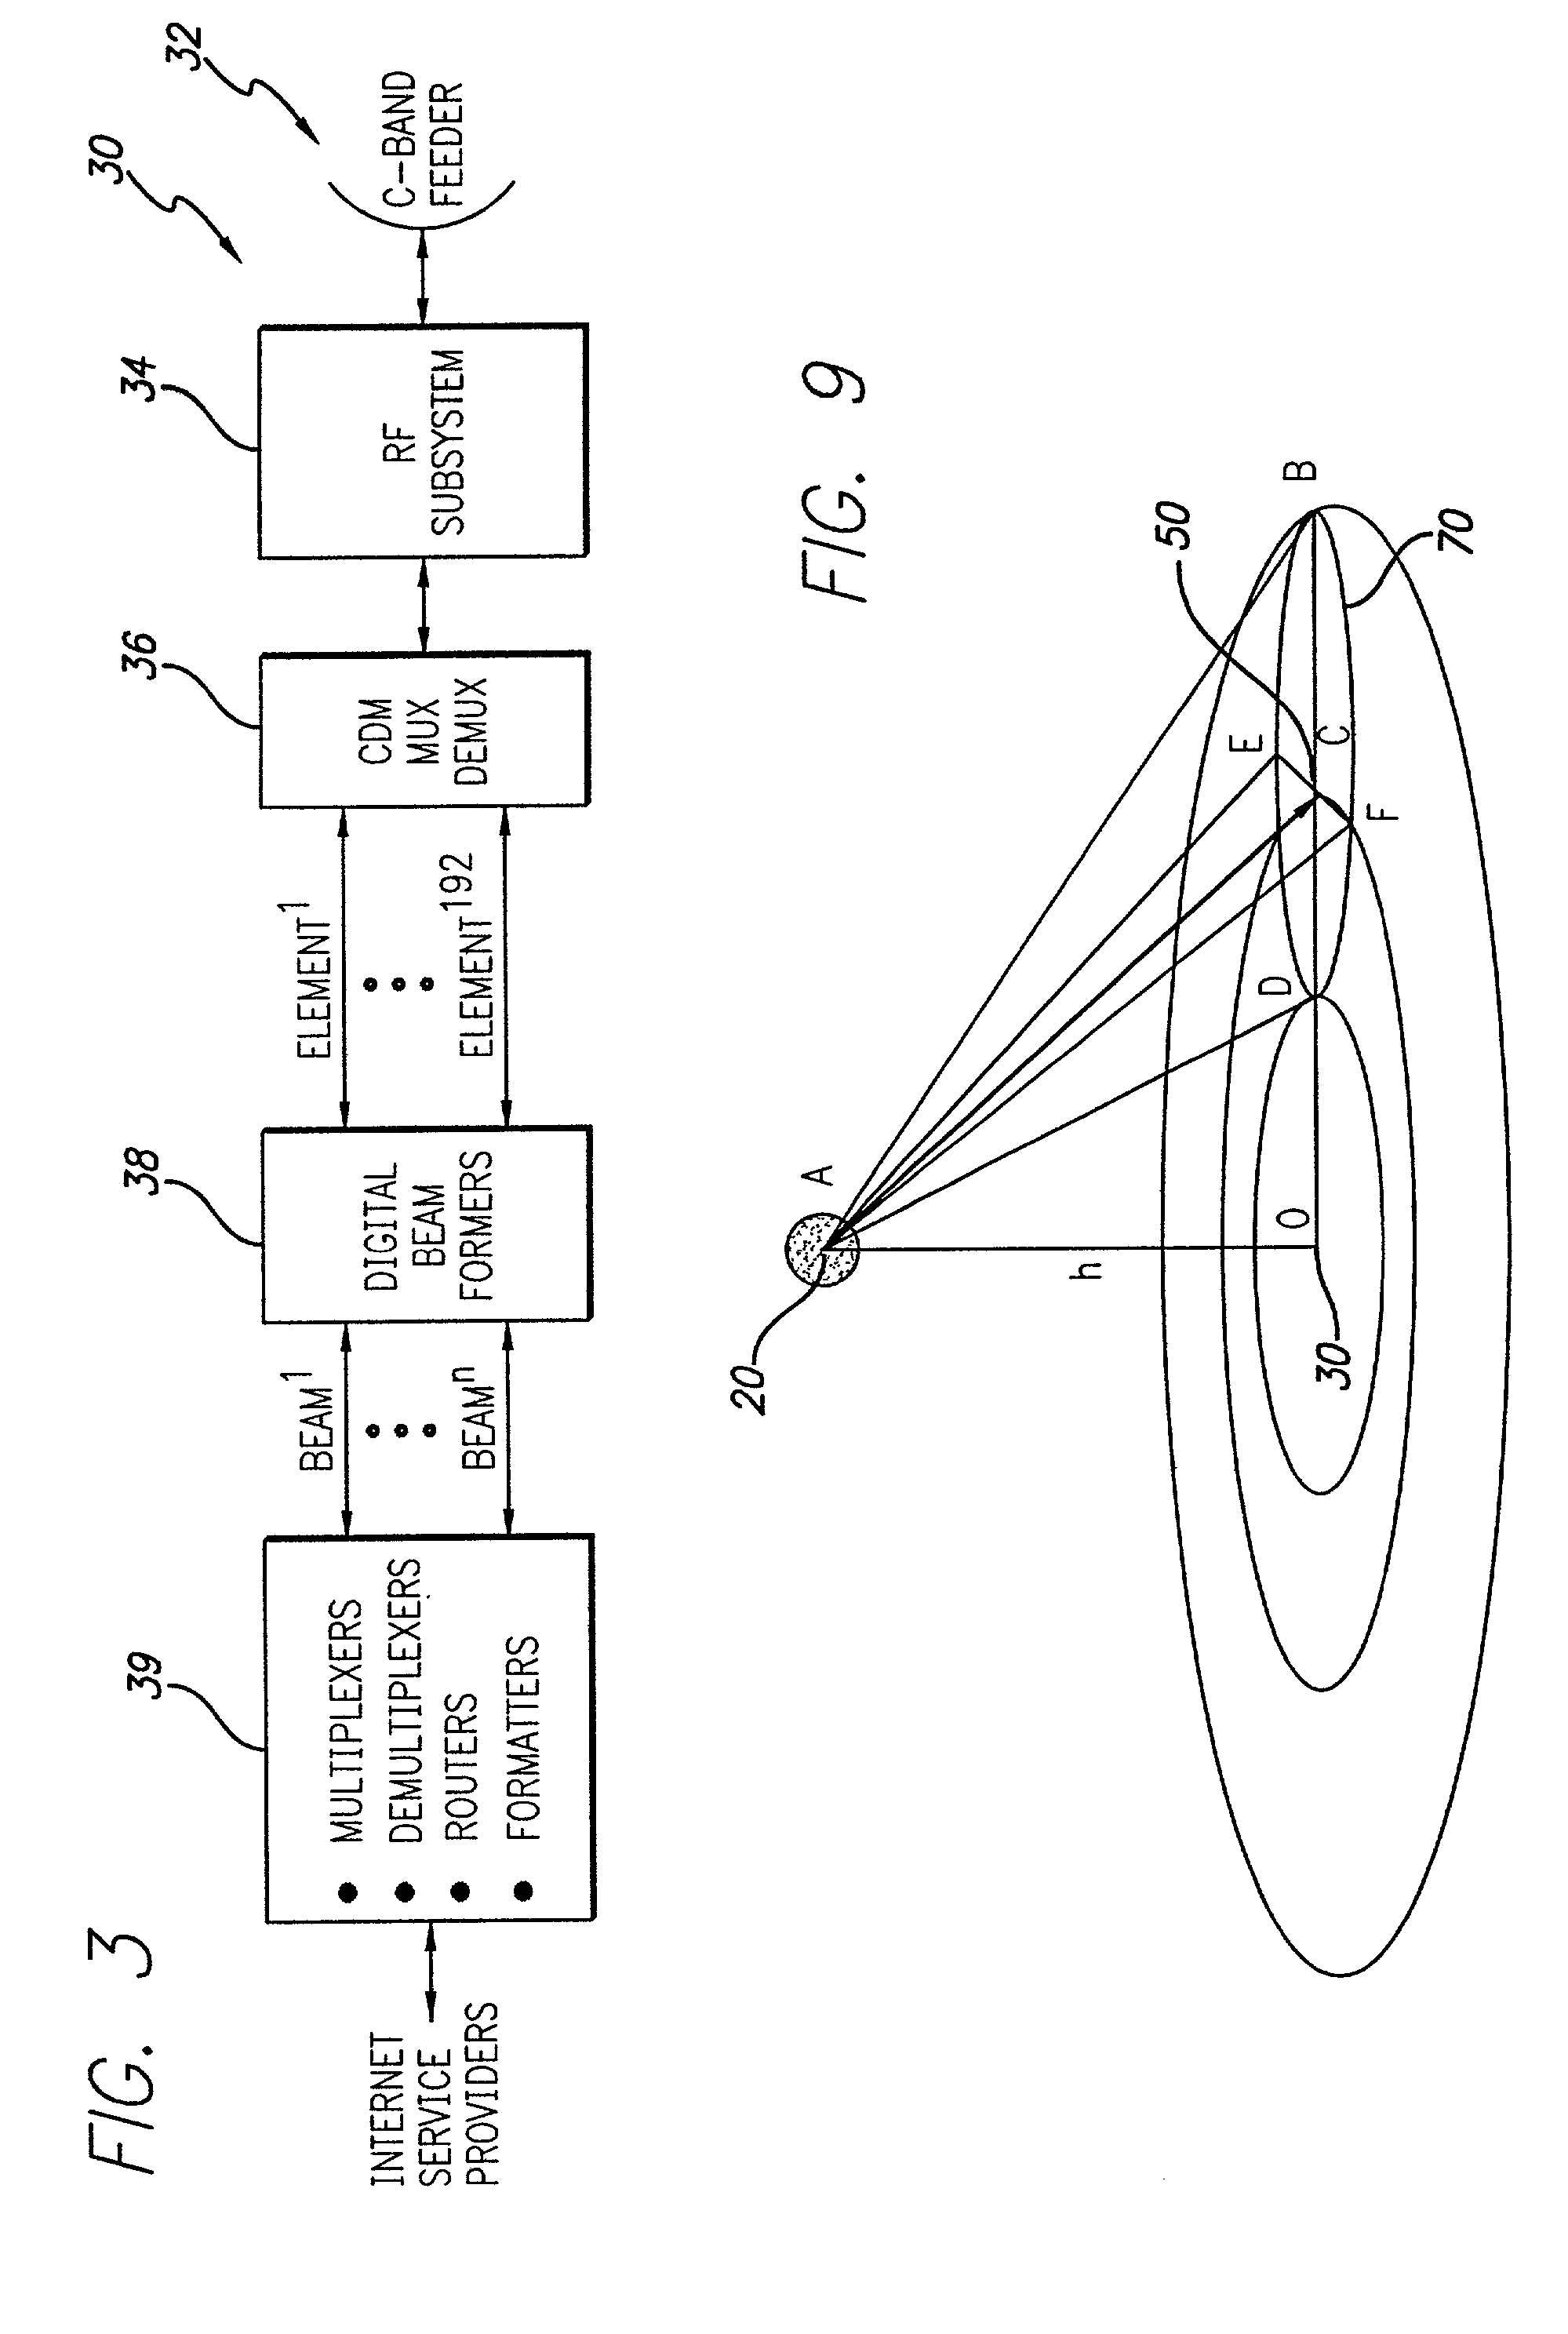 Micro cell architecture for mobile user tracking communication system